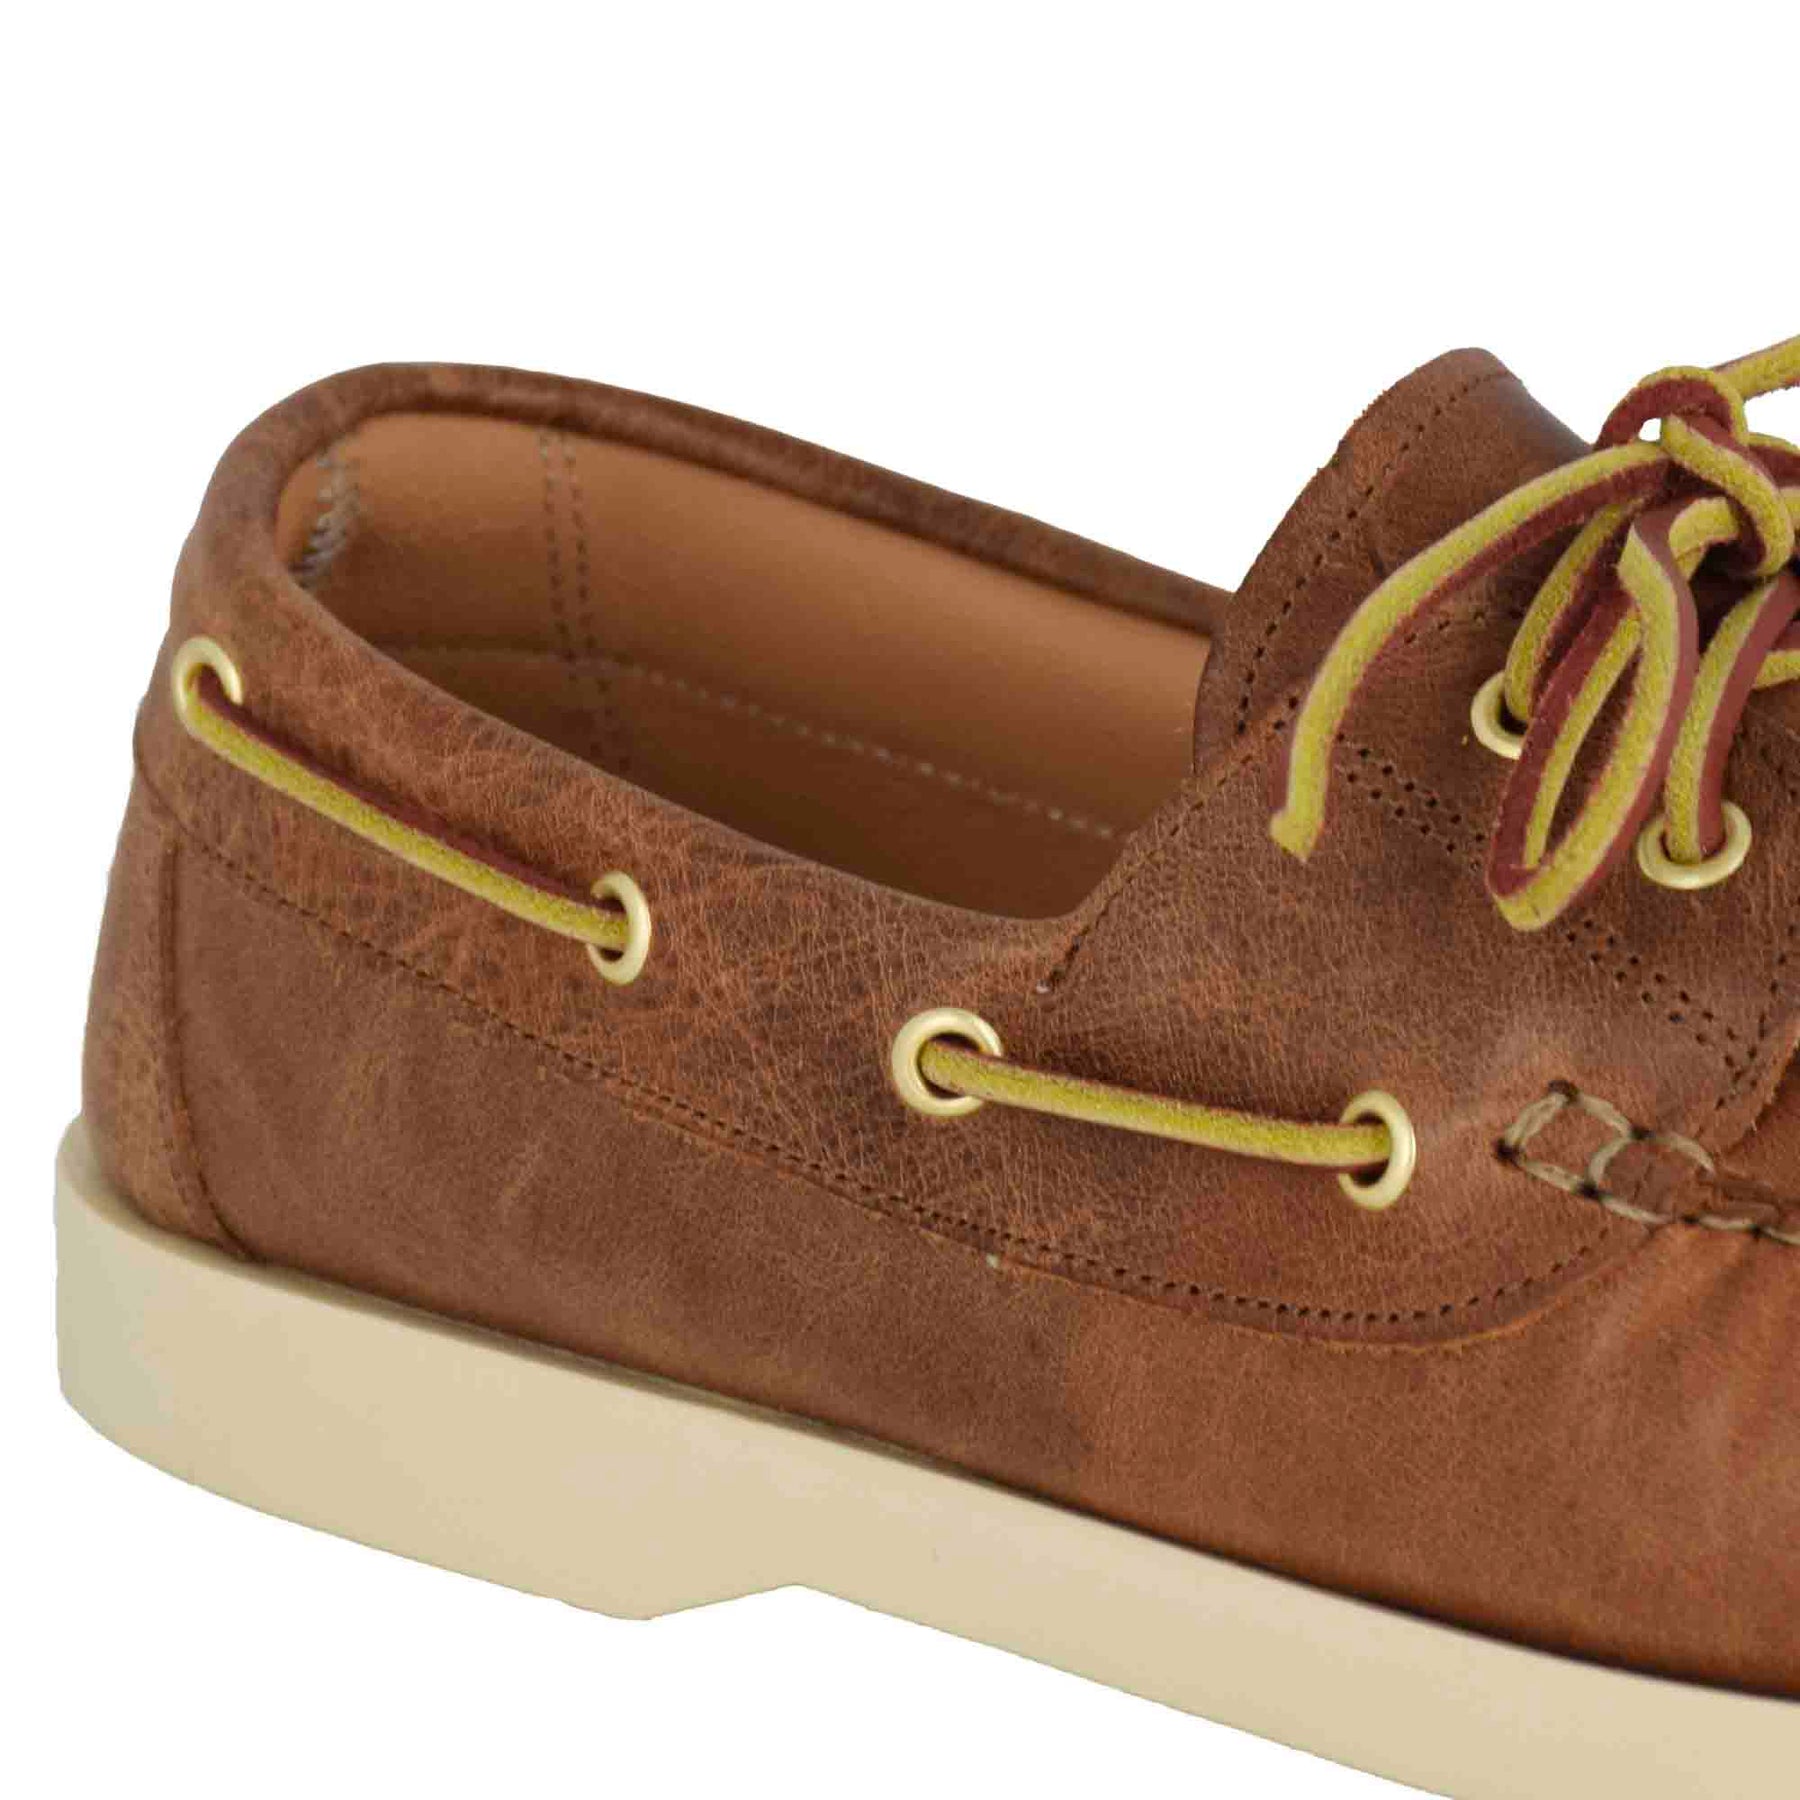 Men's boat moccasin in light brown leather